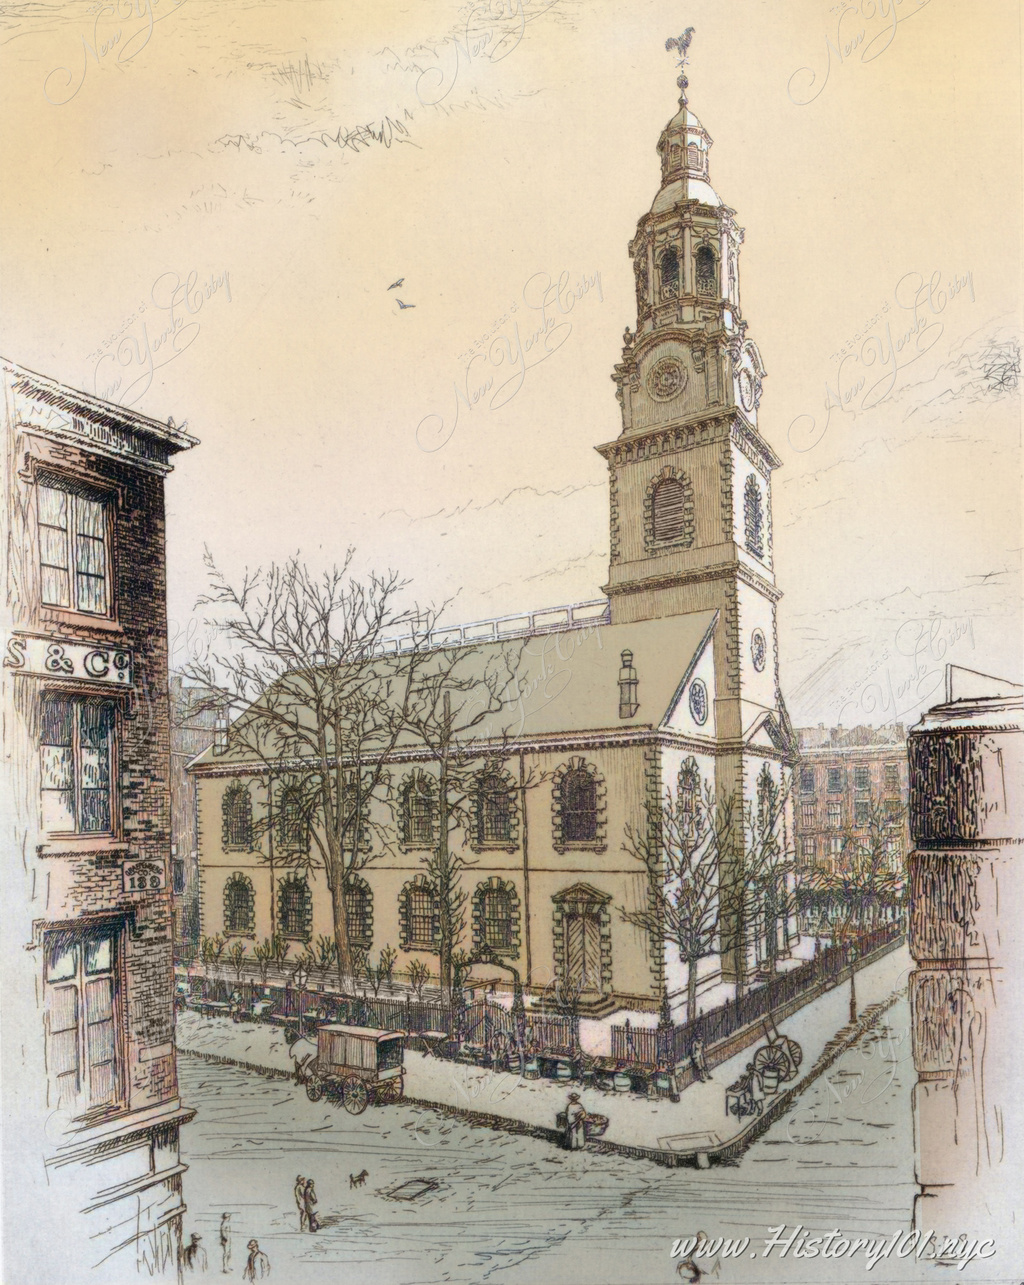 This etching, created by Sidney Lawton Smith from a photograph depicts the North Dutch Church, a historical landmark in New York City